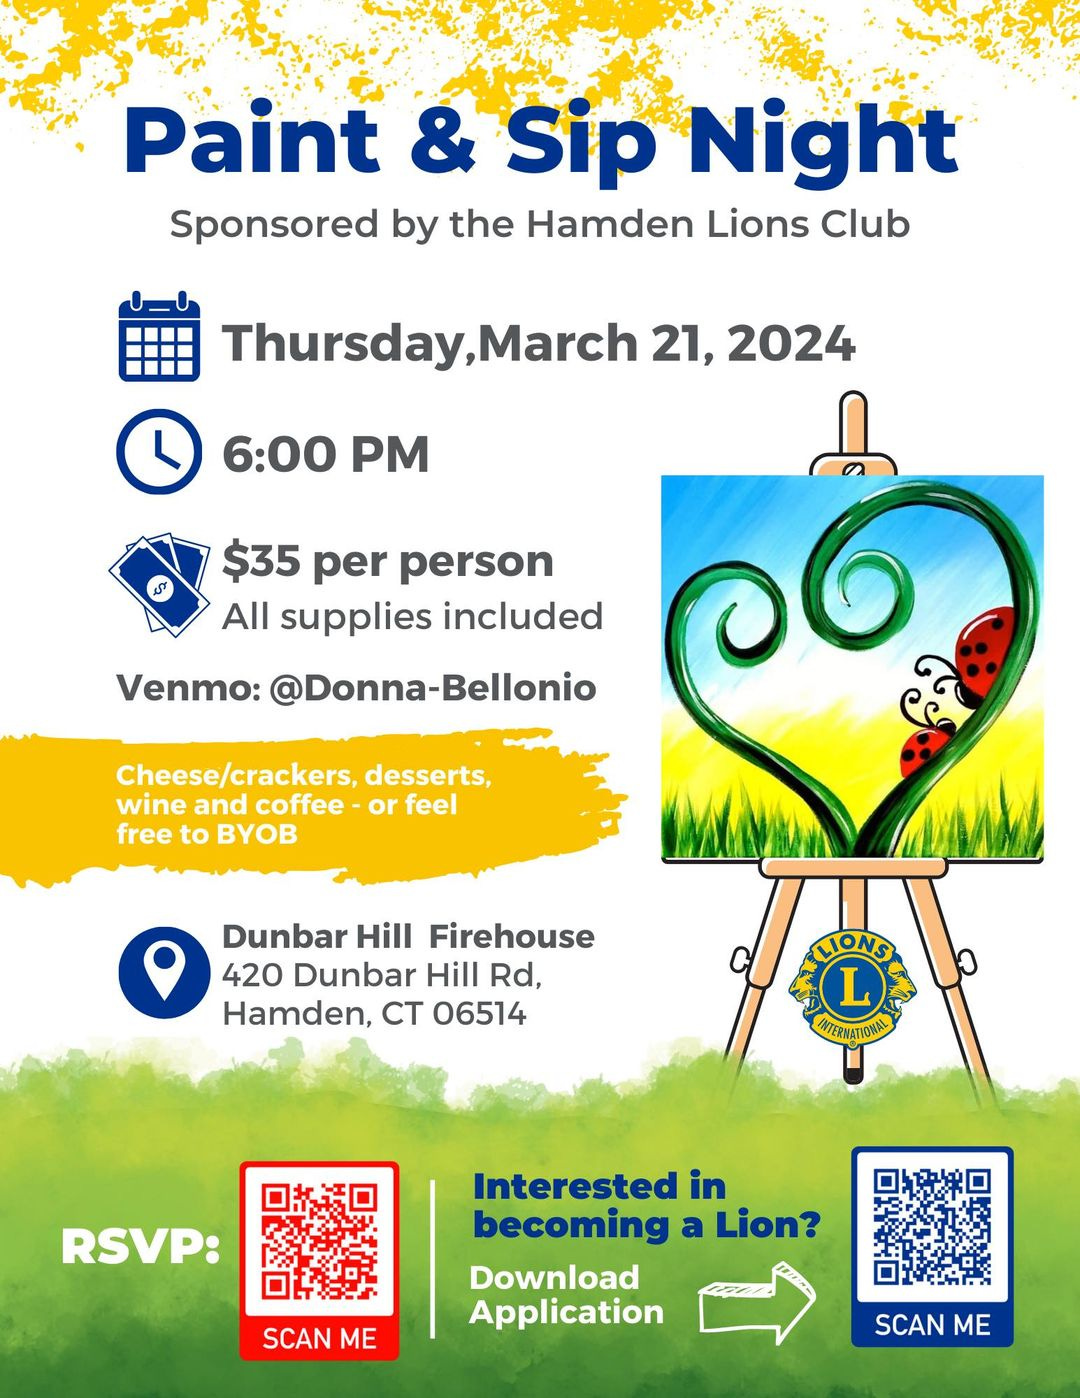 May be a doodle of text that says 'Paint & Sip Night Sponsored by the Hamden Lions Club Ûhuy,March March 21, 2024 6:00 PM $35 per person All supplies included Venmo: @Donna-Bellonio Cheese/crackers, desserts, wine and coffee or feel free to BYOB Dunbar Hill Firehouse 420 Dunbar Hill Rd, Hamden, CT 06514 LIONS L INTERNATIONAL RSVP: Interested in becoming a Lion? Download Application SCAN ME SCAN ME'